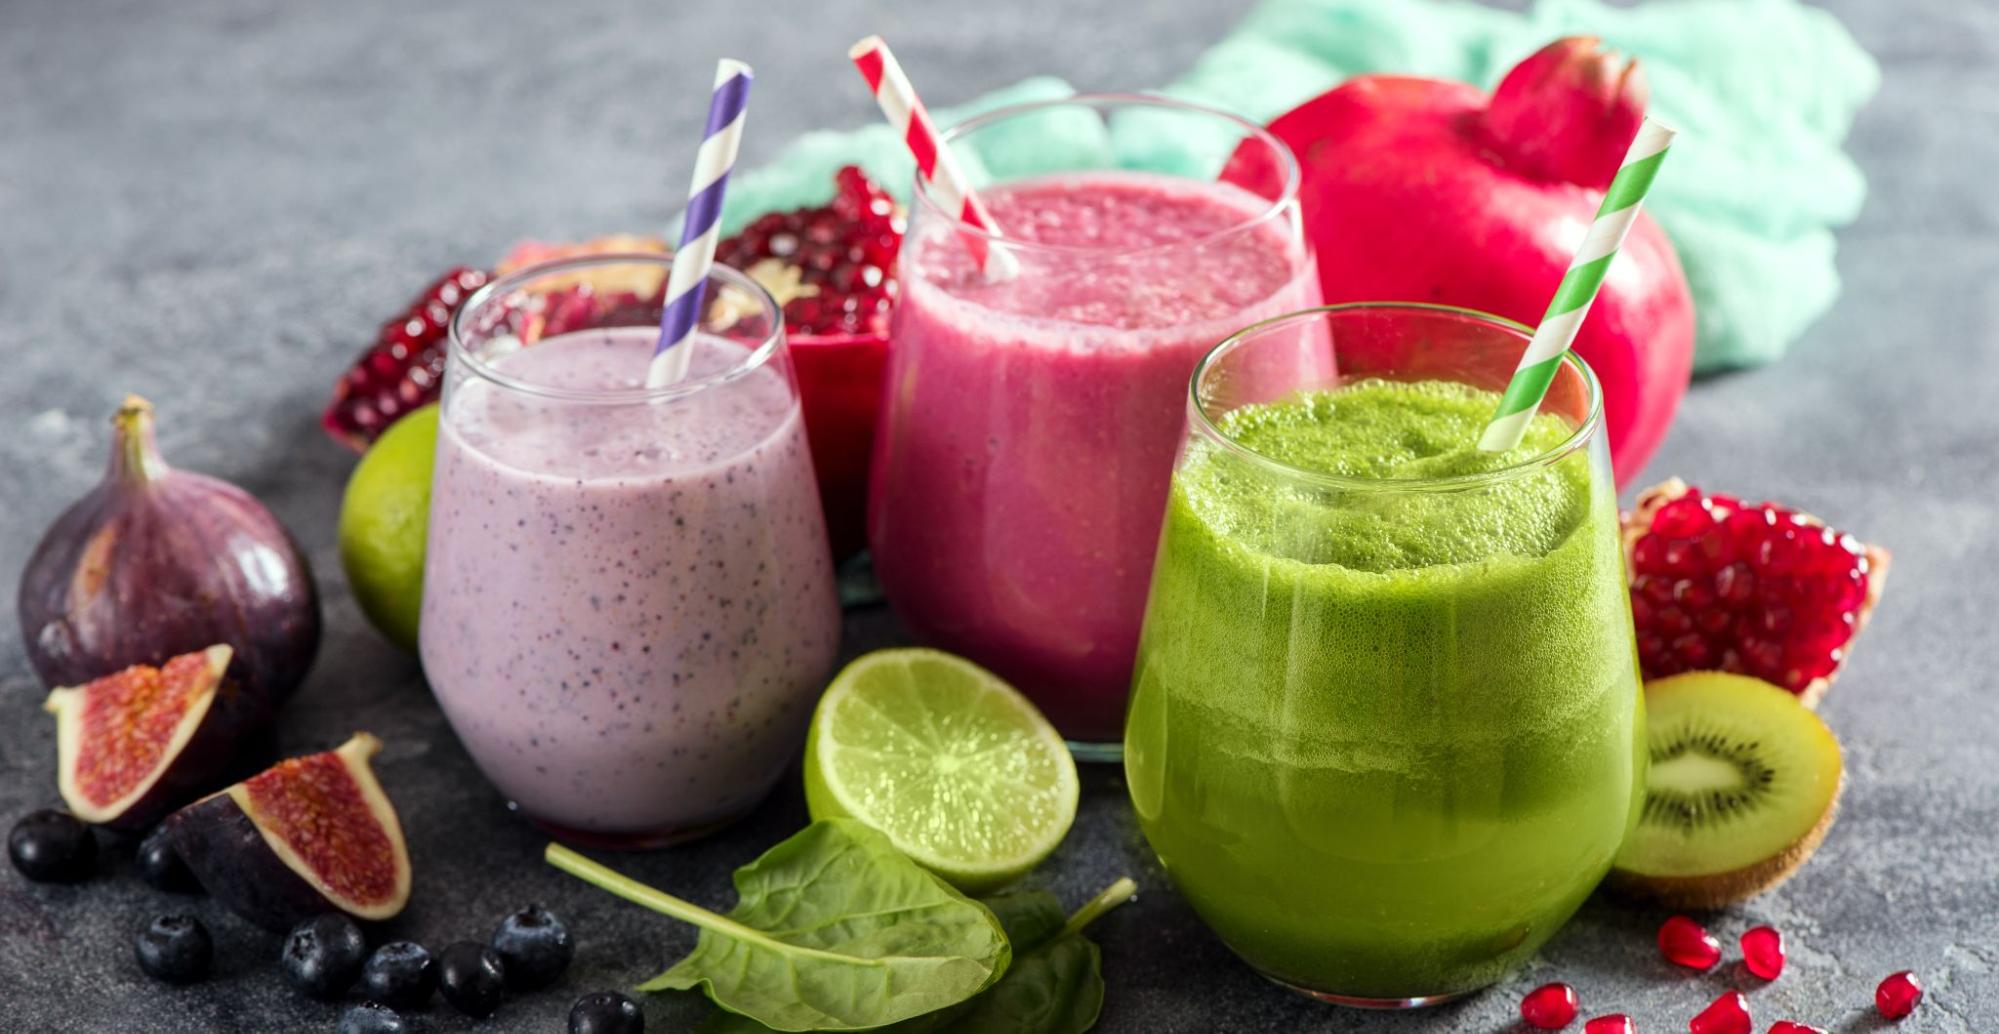 Smoothies are a great soft food for oral surgery recovery